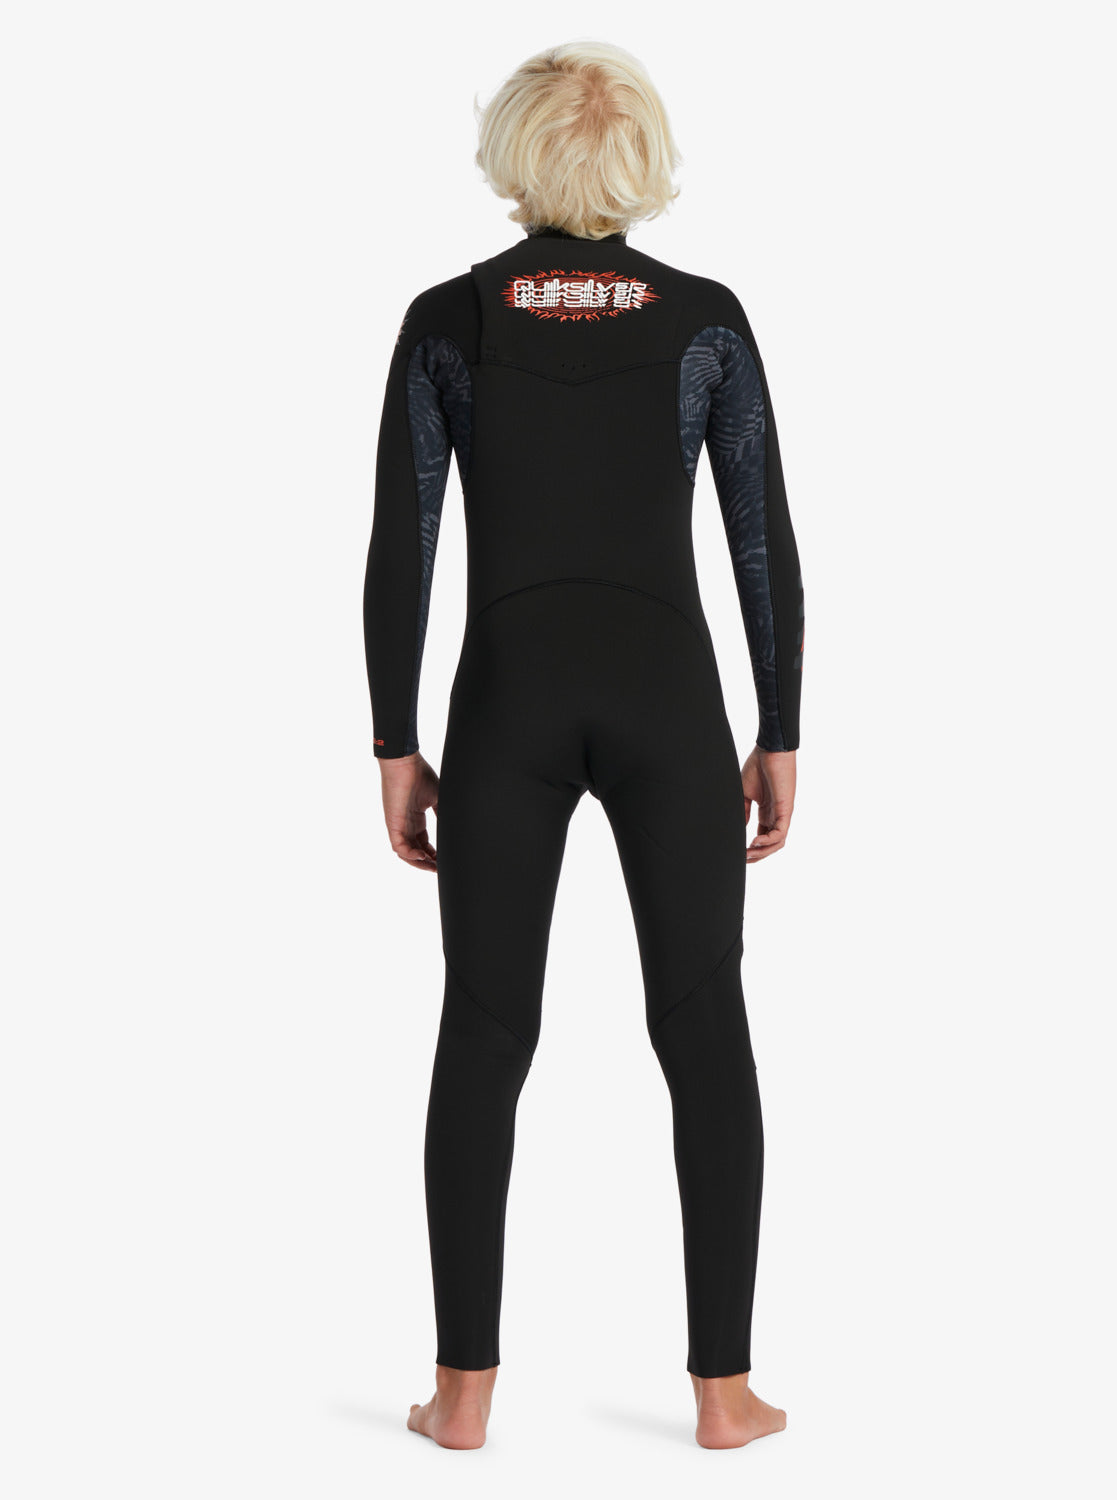 Quiksilver Boys 3/2mm Everyday Sessions Chest Zip Wetsuit - Black - Star Surf + Skate